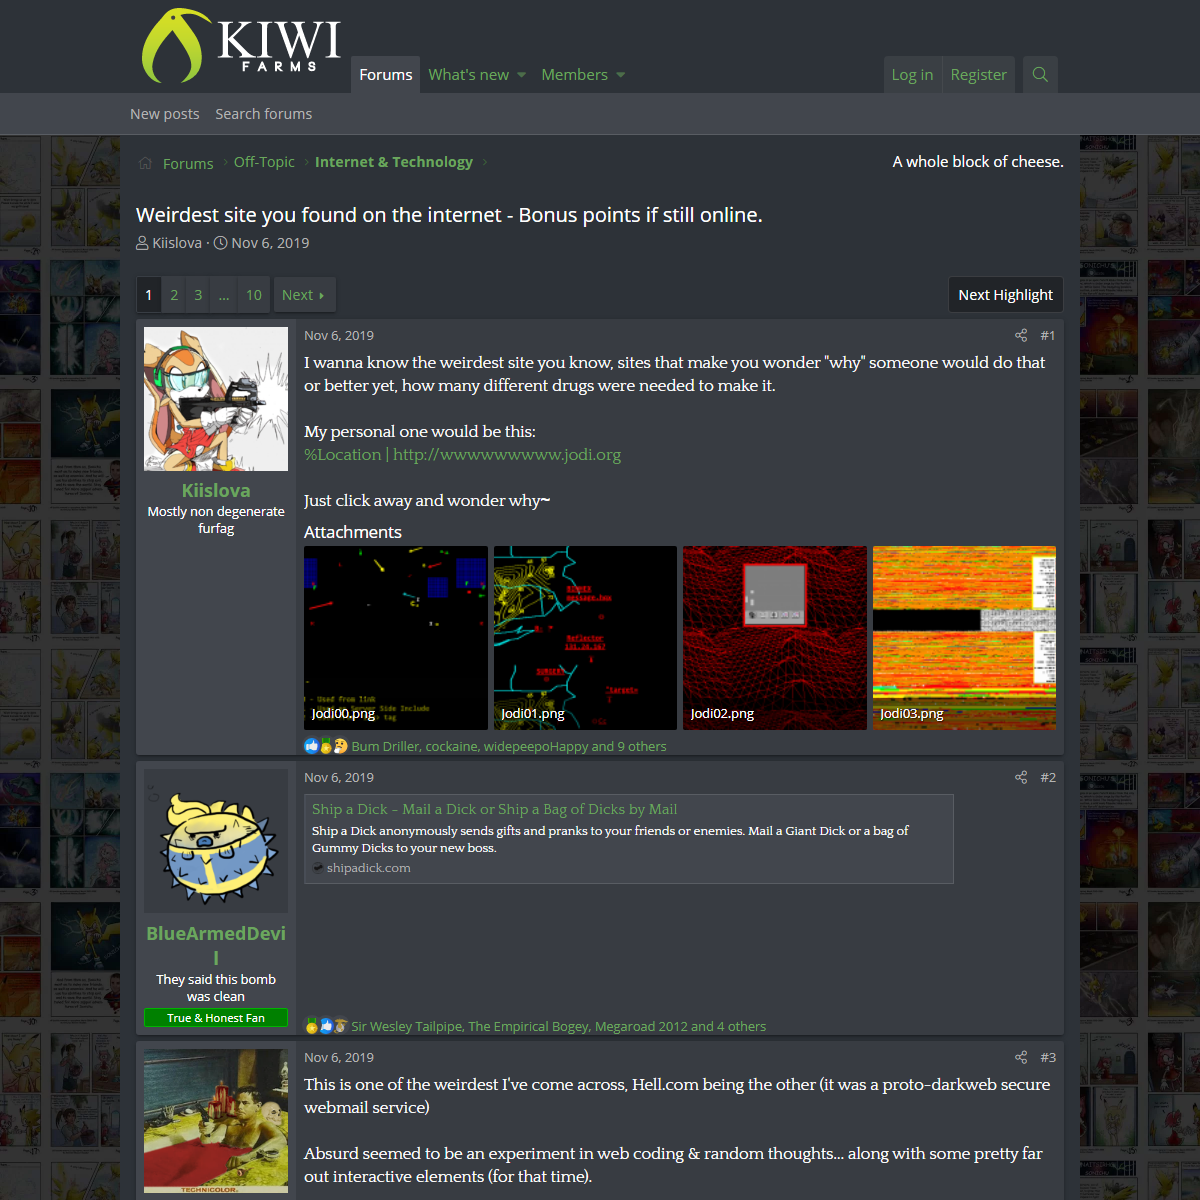 A complete backup of https://kiwifarms.net/threads/weirdest-site-you-found-on-the-internet.62908/